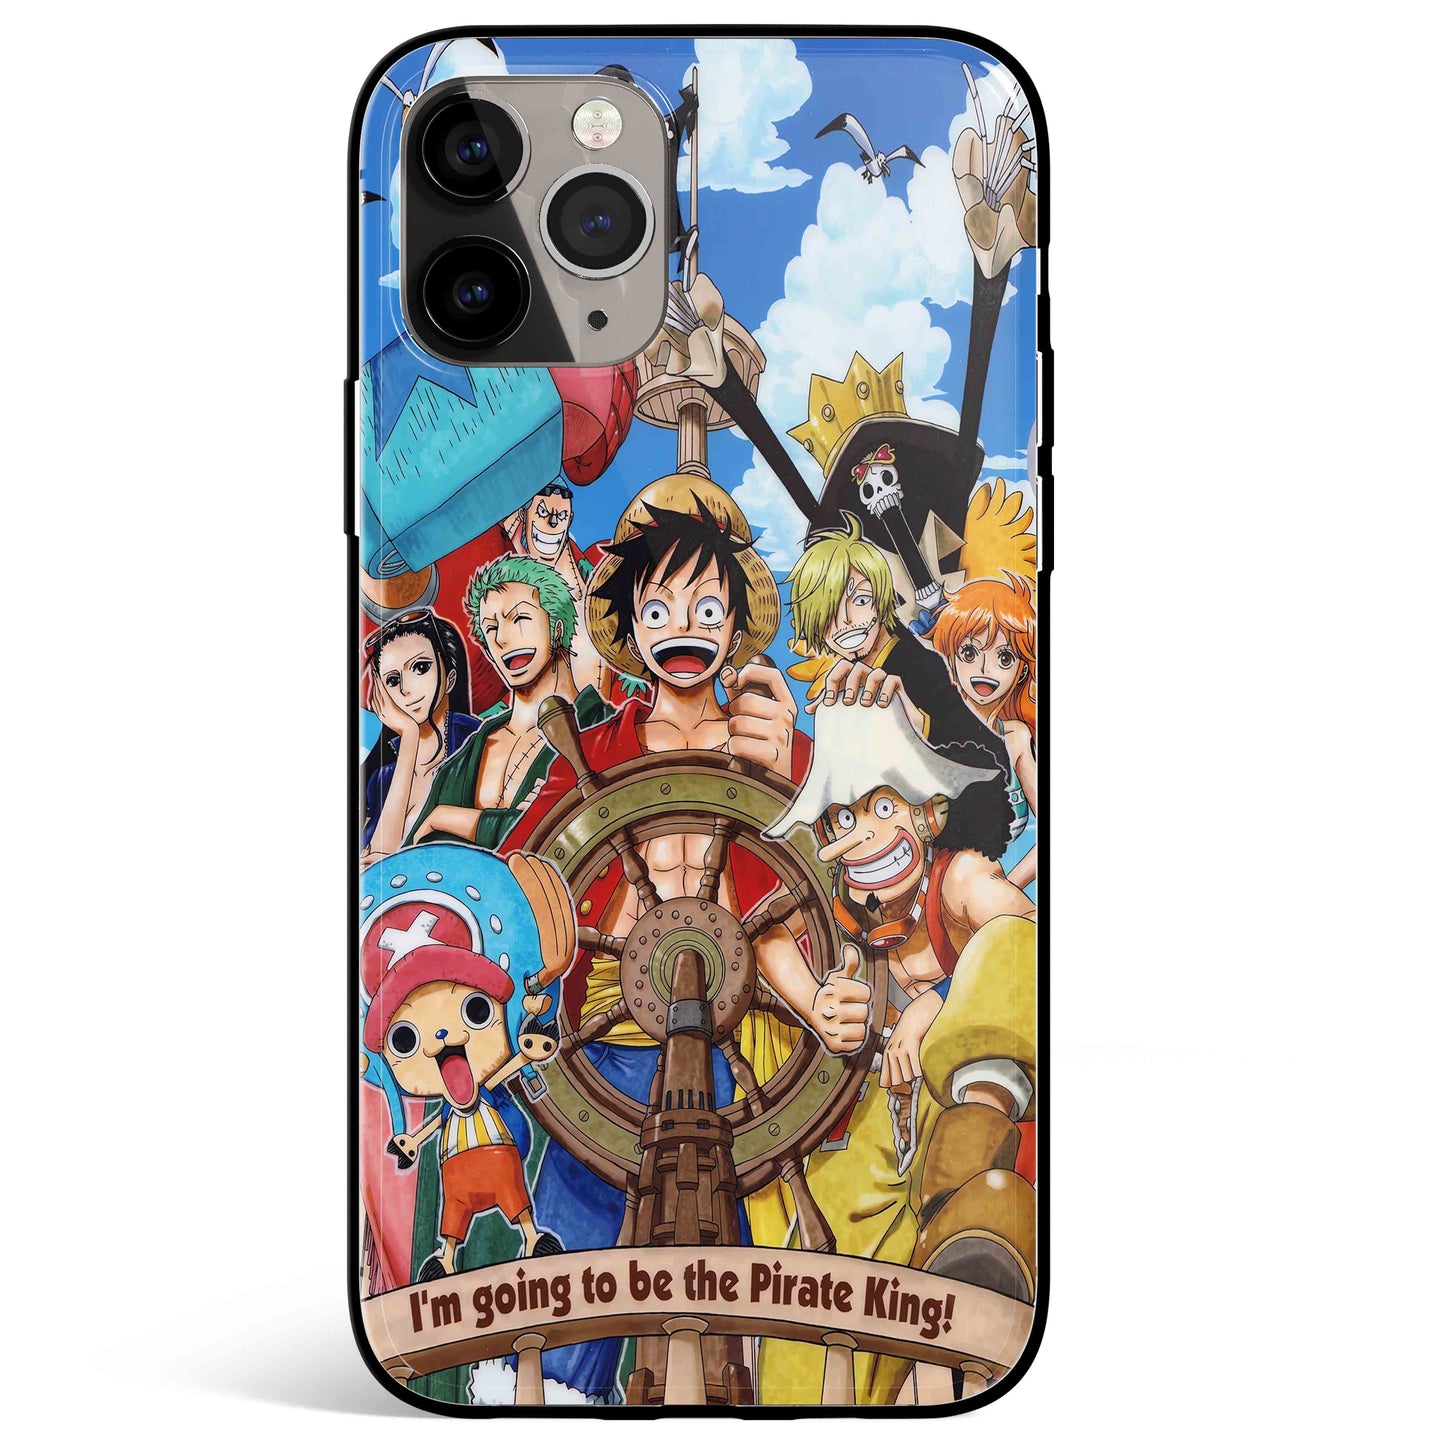 One Piece To Be the Pirate King Tempered Glass Soft Silicone iPhone Case-Phone Case-Monkey Ninja-iPhone X/XS-Tempered Glass-Monkey Ninja